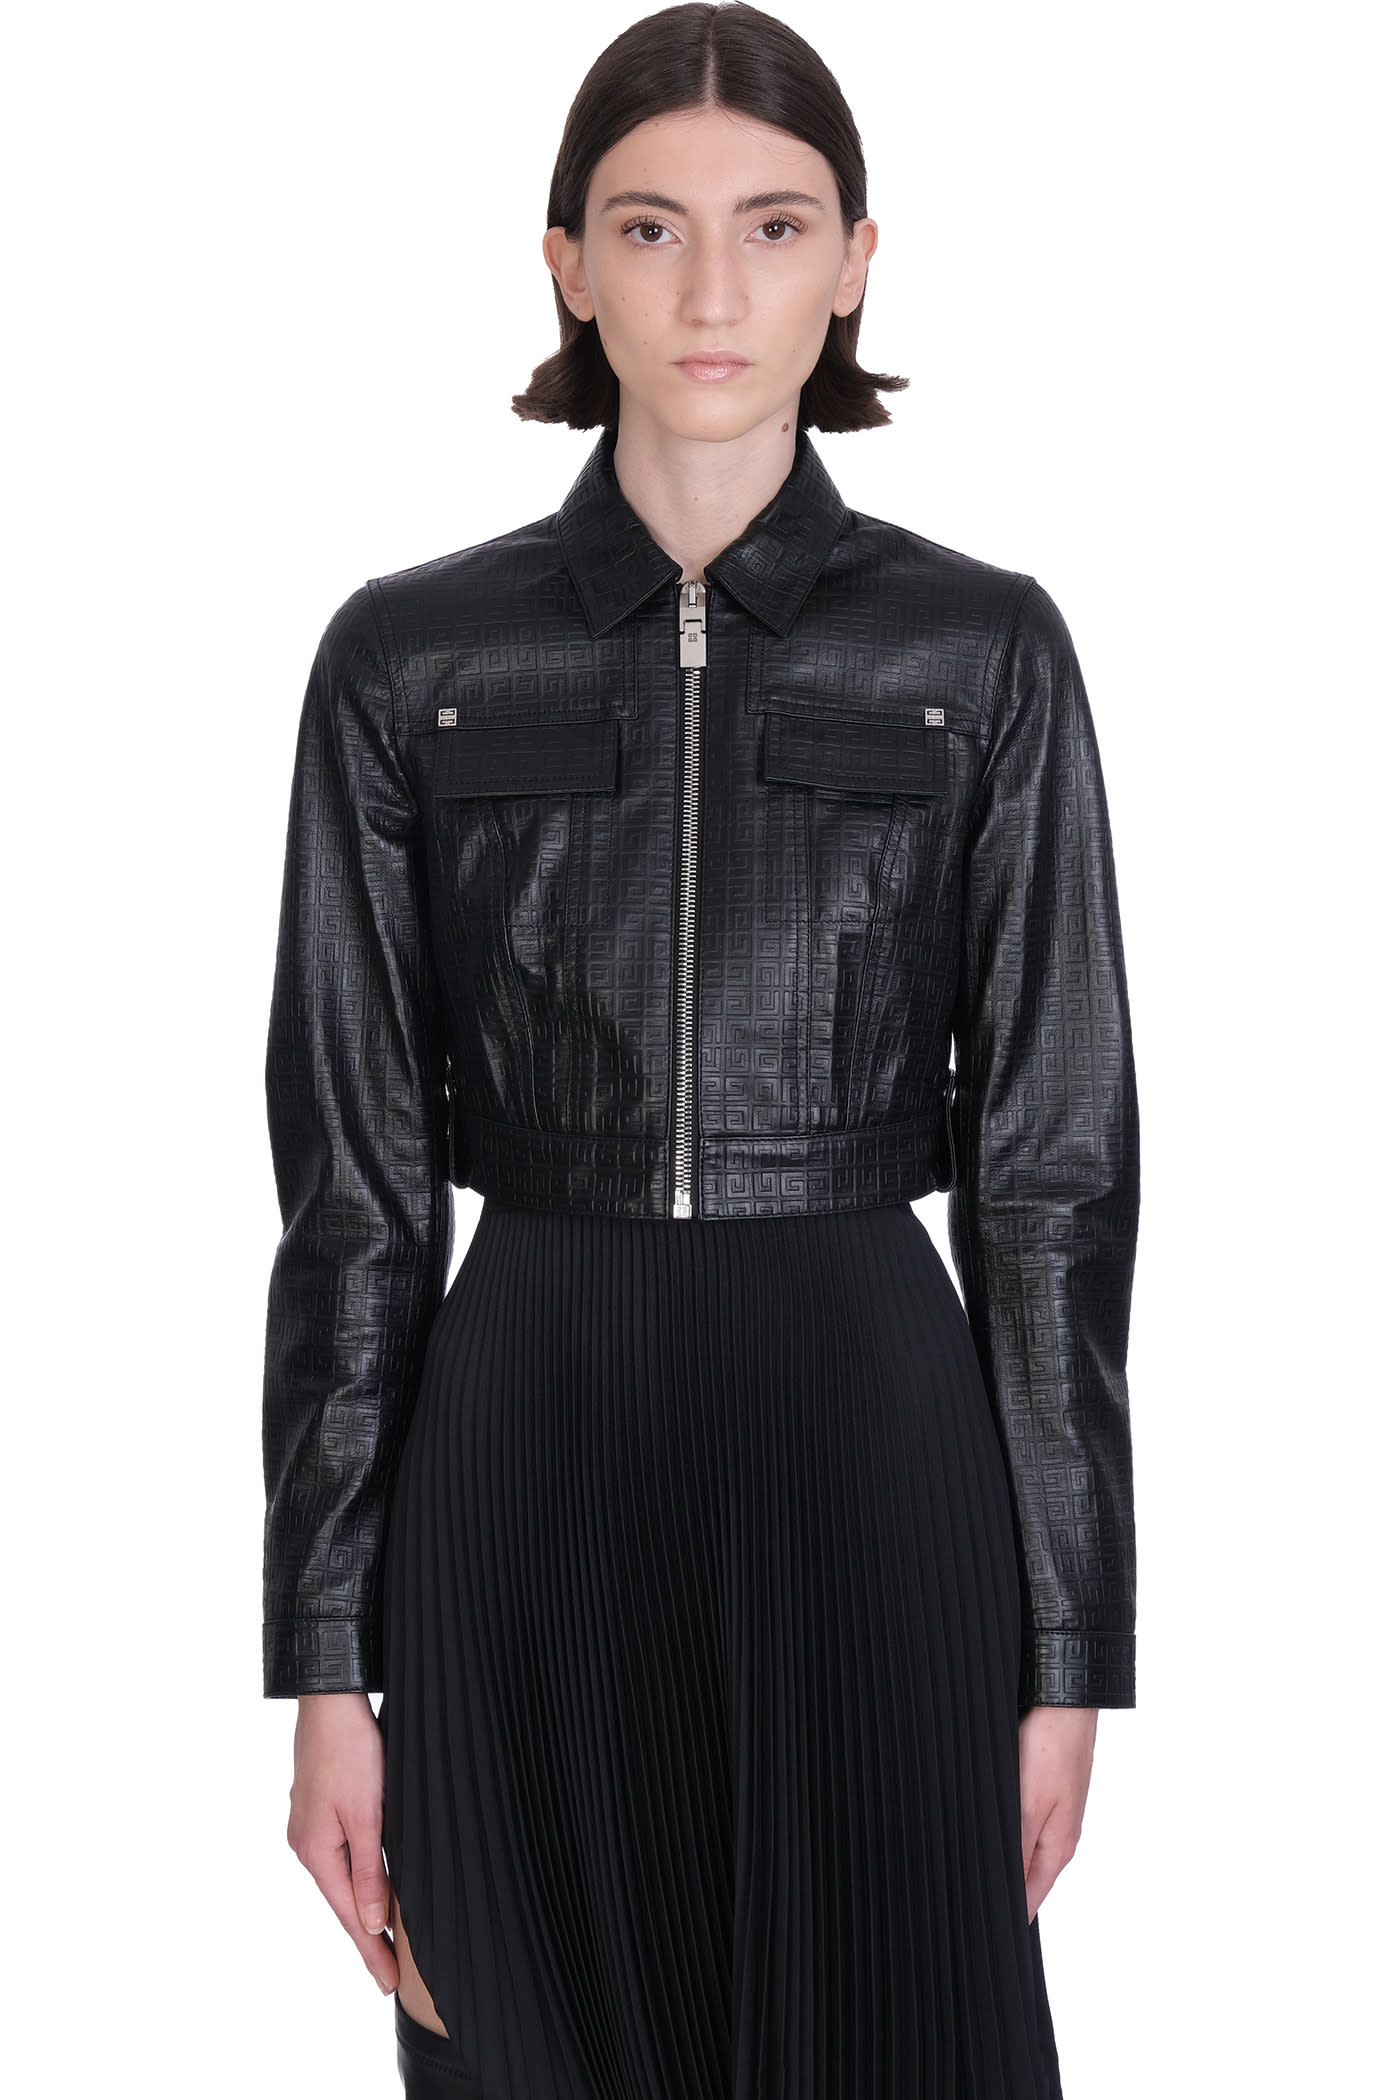 Givenchy Leather Jacket In Black Leather | Coshio Online Shop